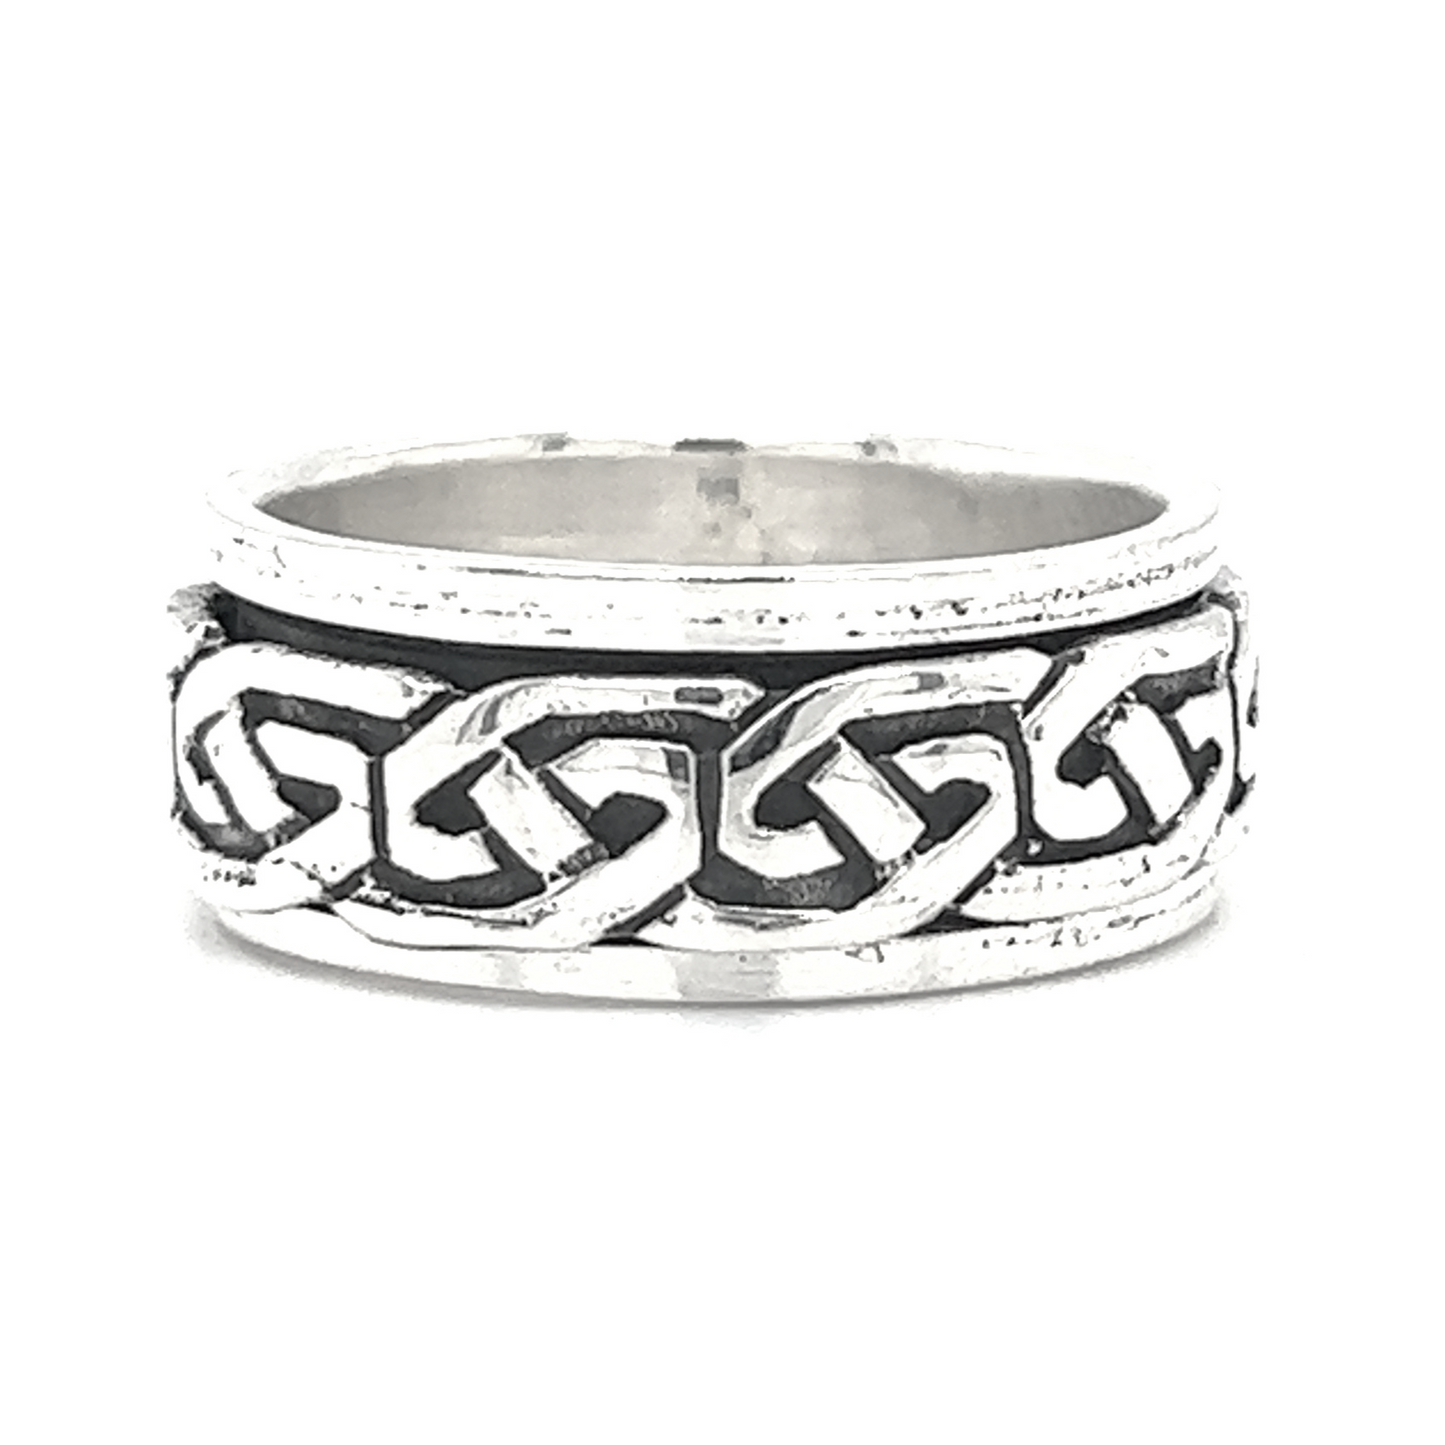 A discreet Spinner Band With Celtic Design fidget toy with a spinning band.